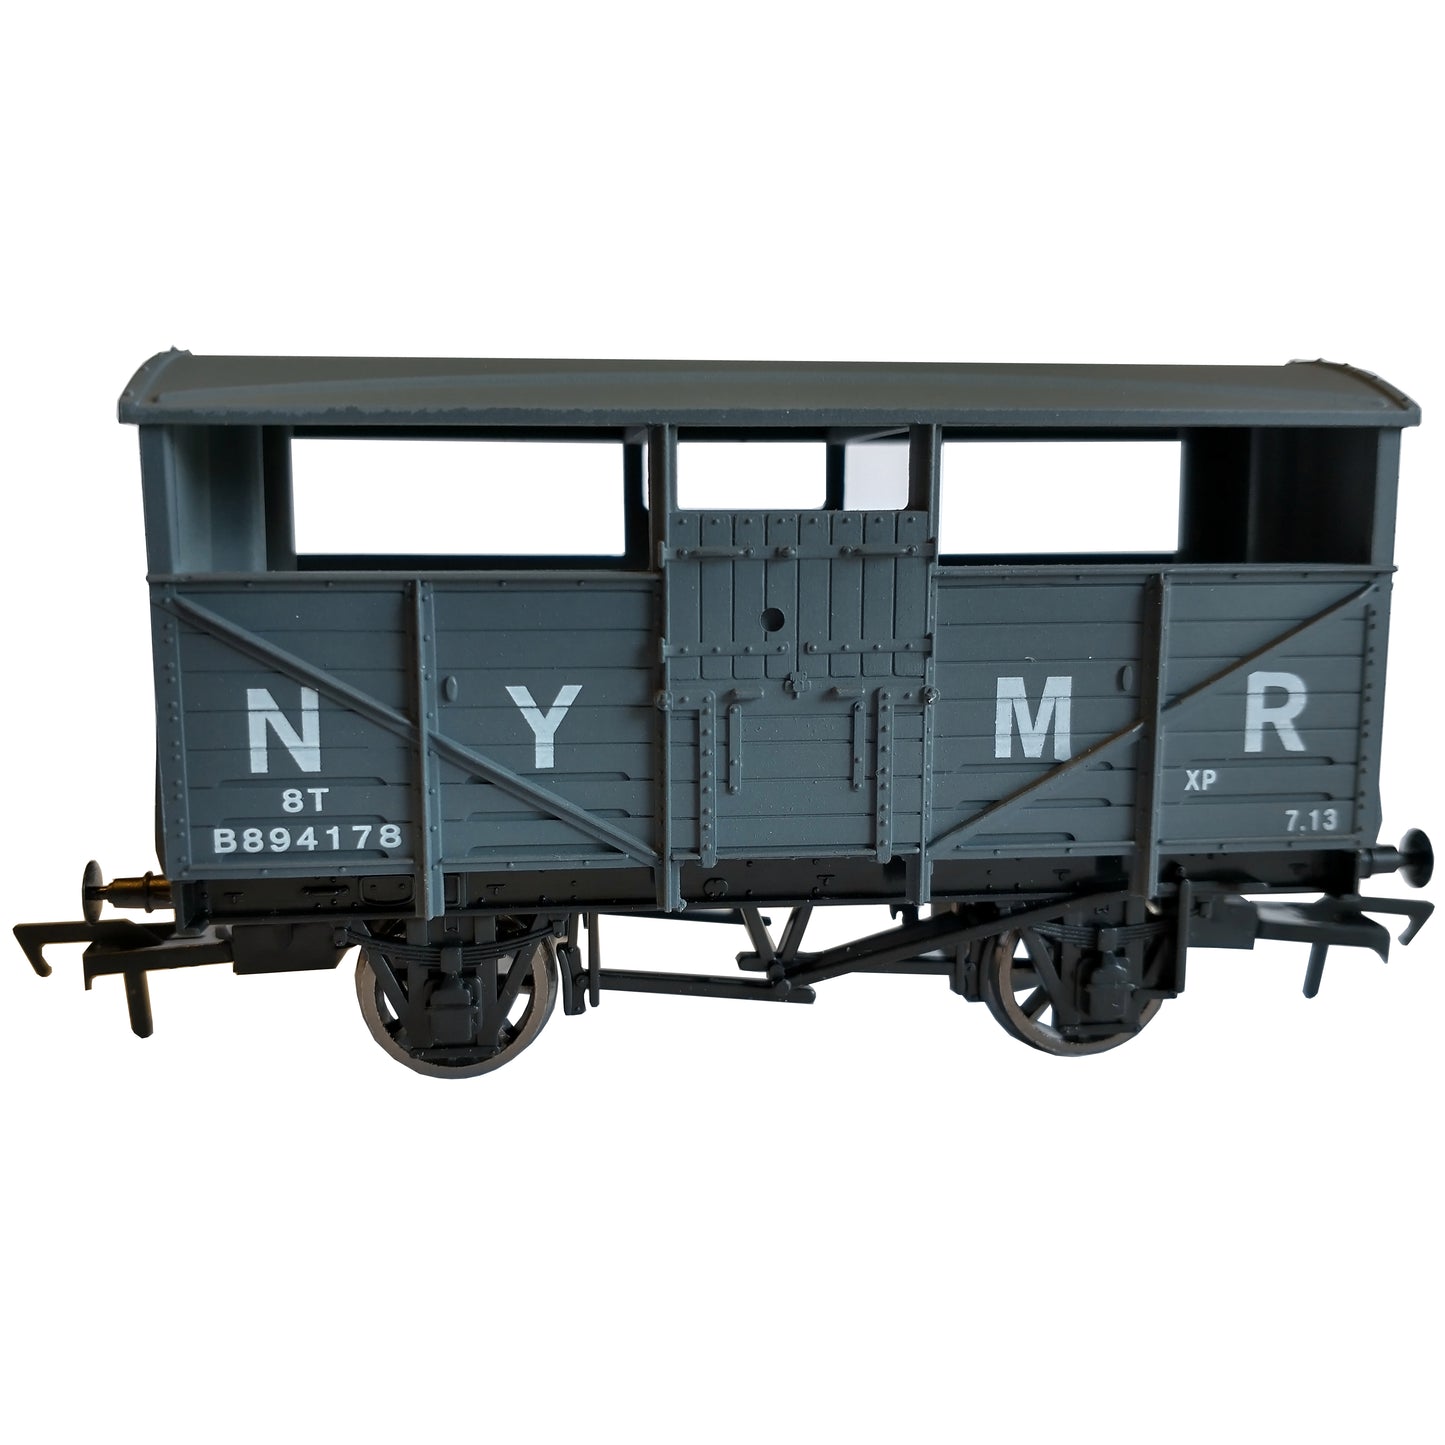 Side of grey Dapol 00 gauge Cattle Wagon printed in white with N Y M R, 8 T, B894178, XP, 7.13